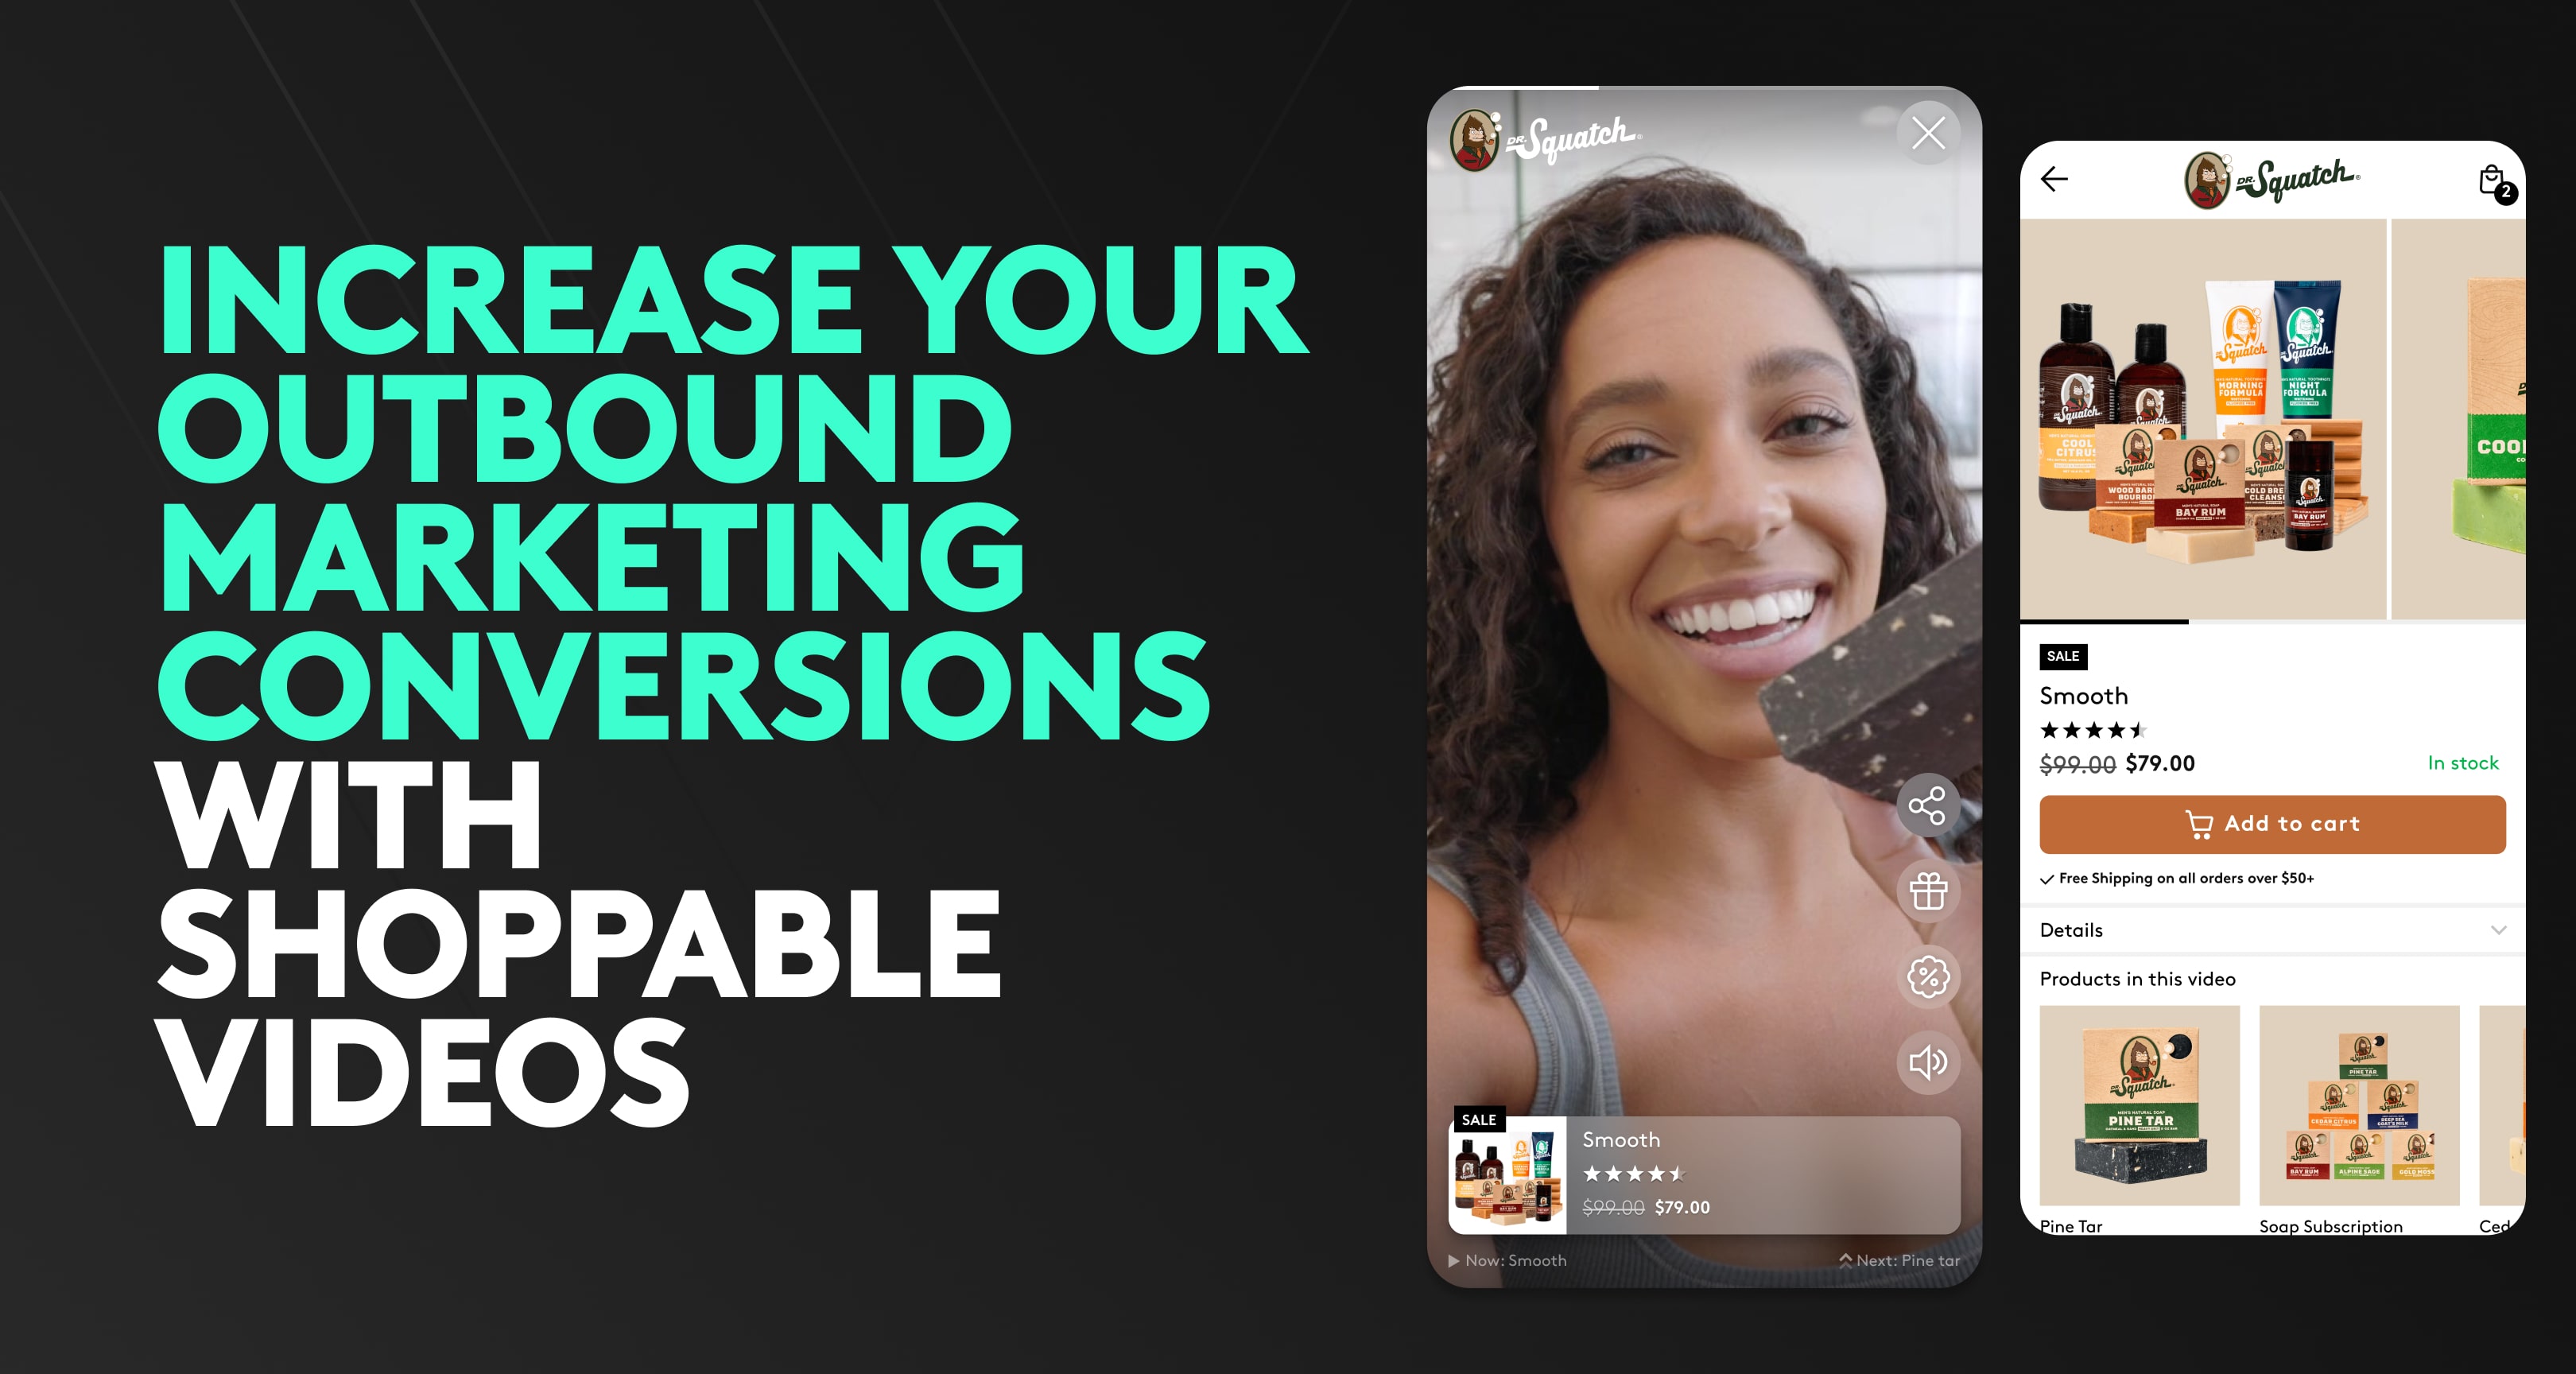 How to Increase Your Outbound Marketing Conversion Rate With Shoppable Video Campaigns